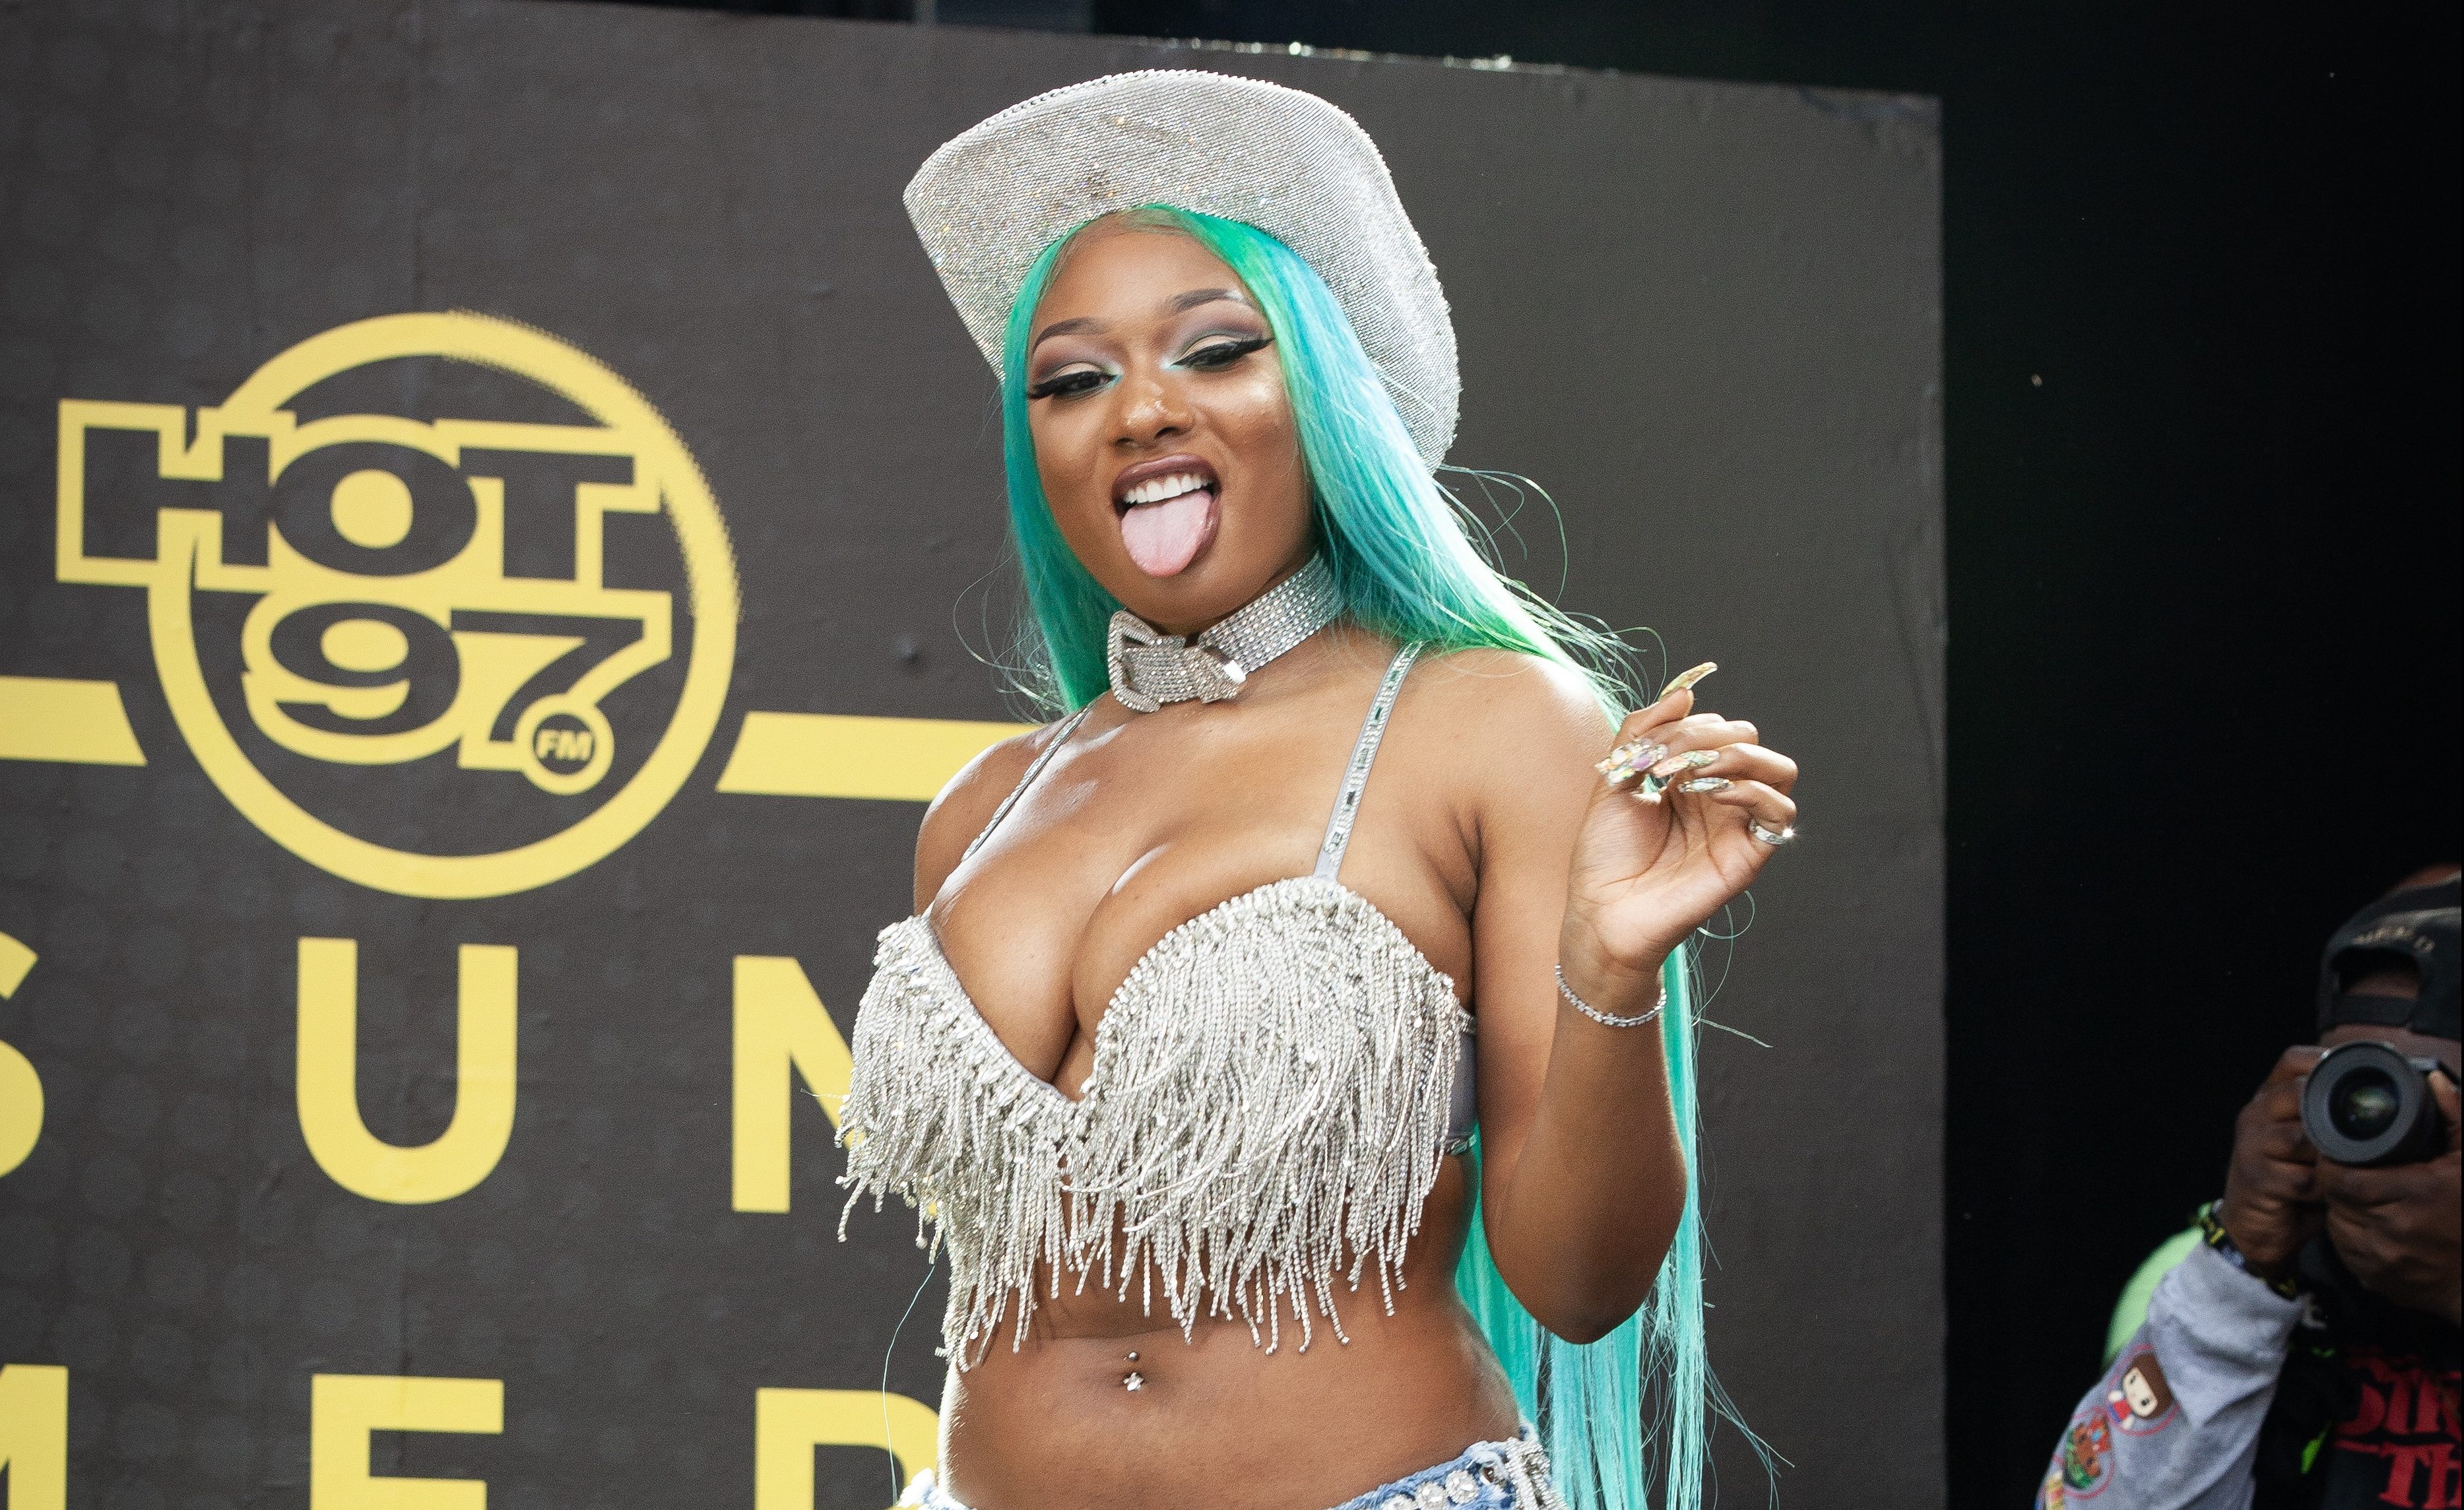 Thirsty Twitter Reacts To Megan Thee Stallion & Jordyn Wood's Photos